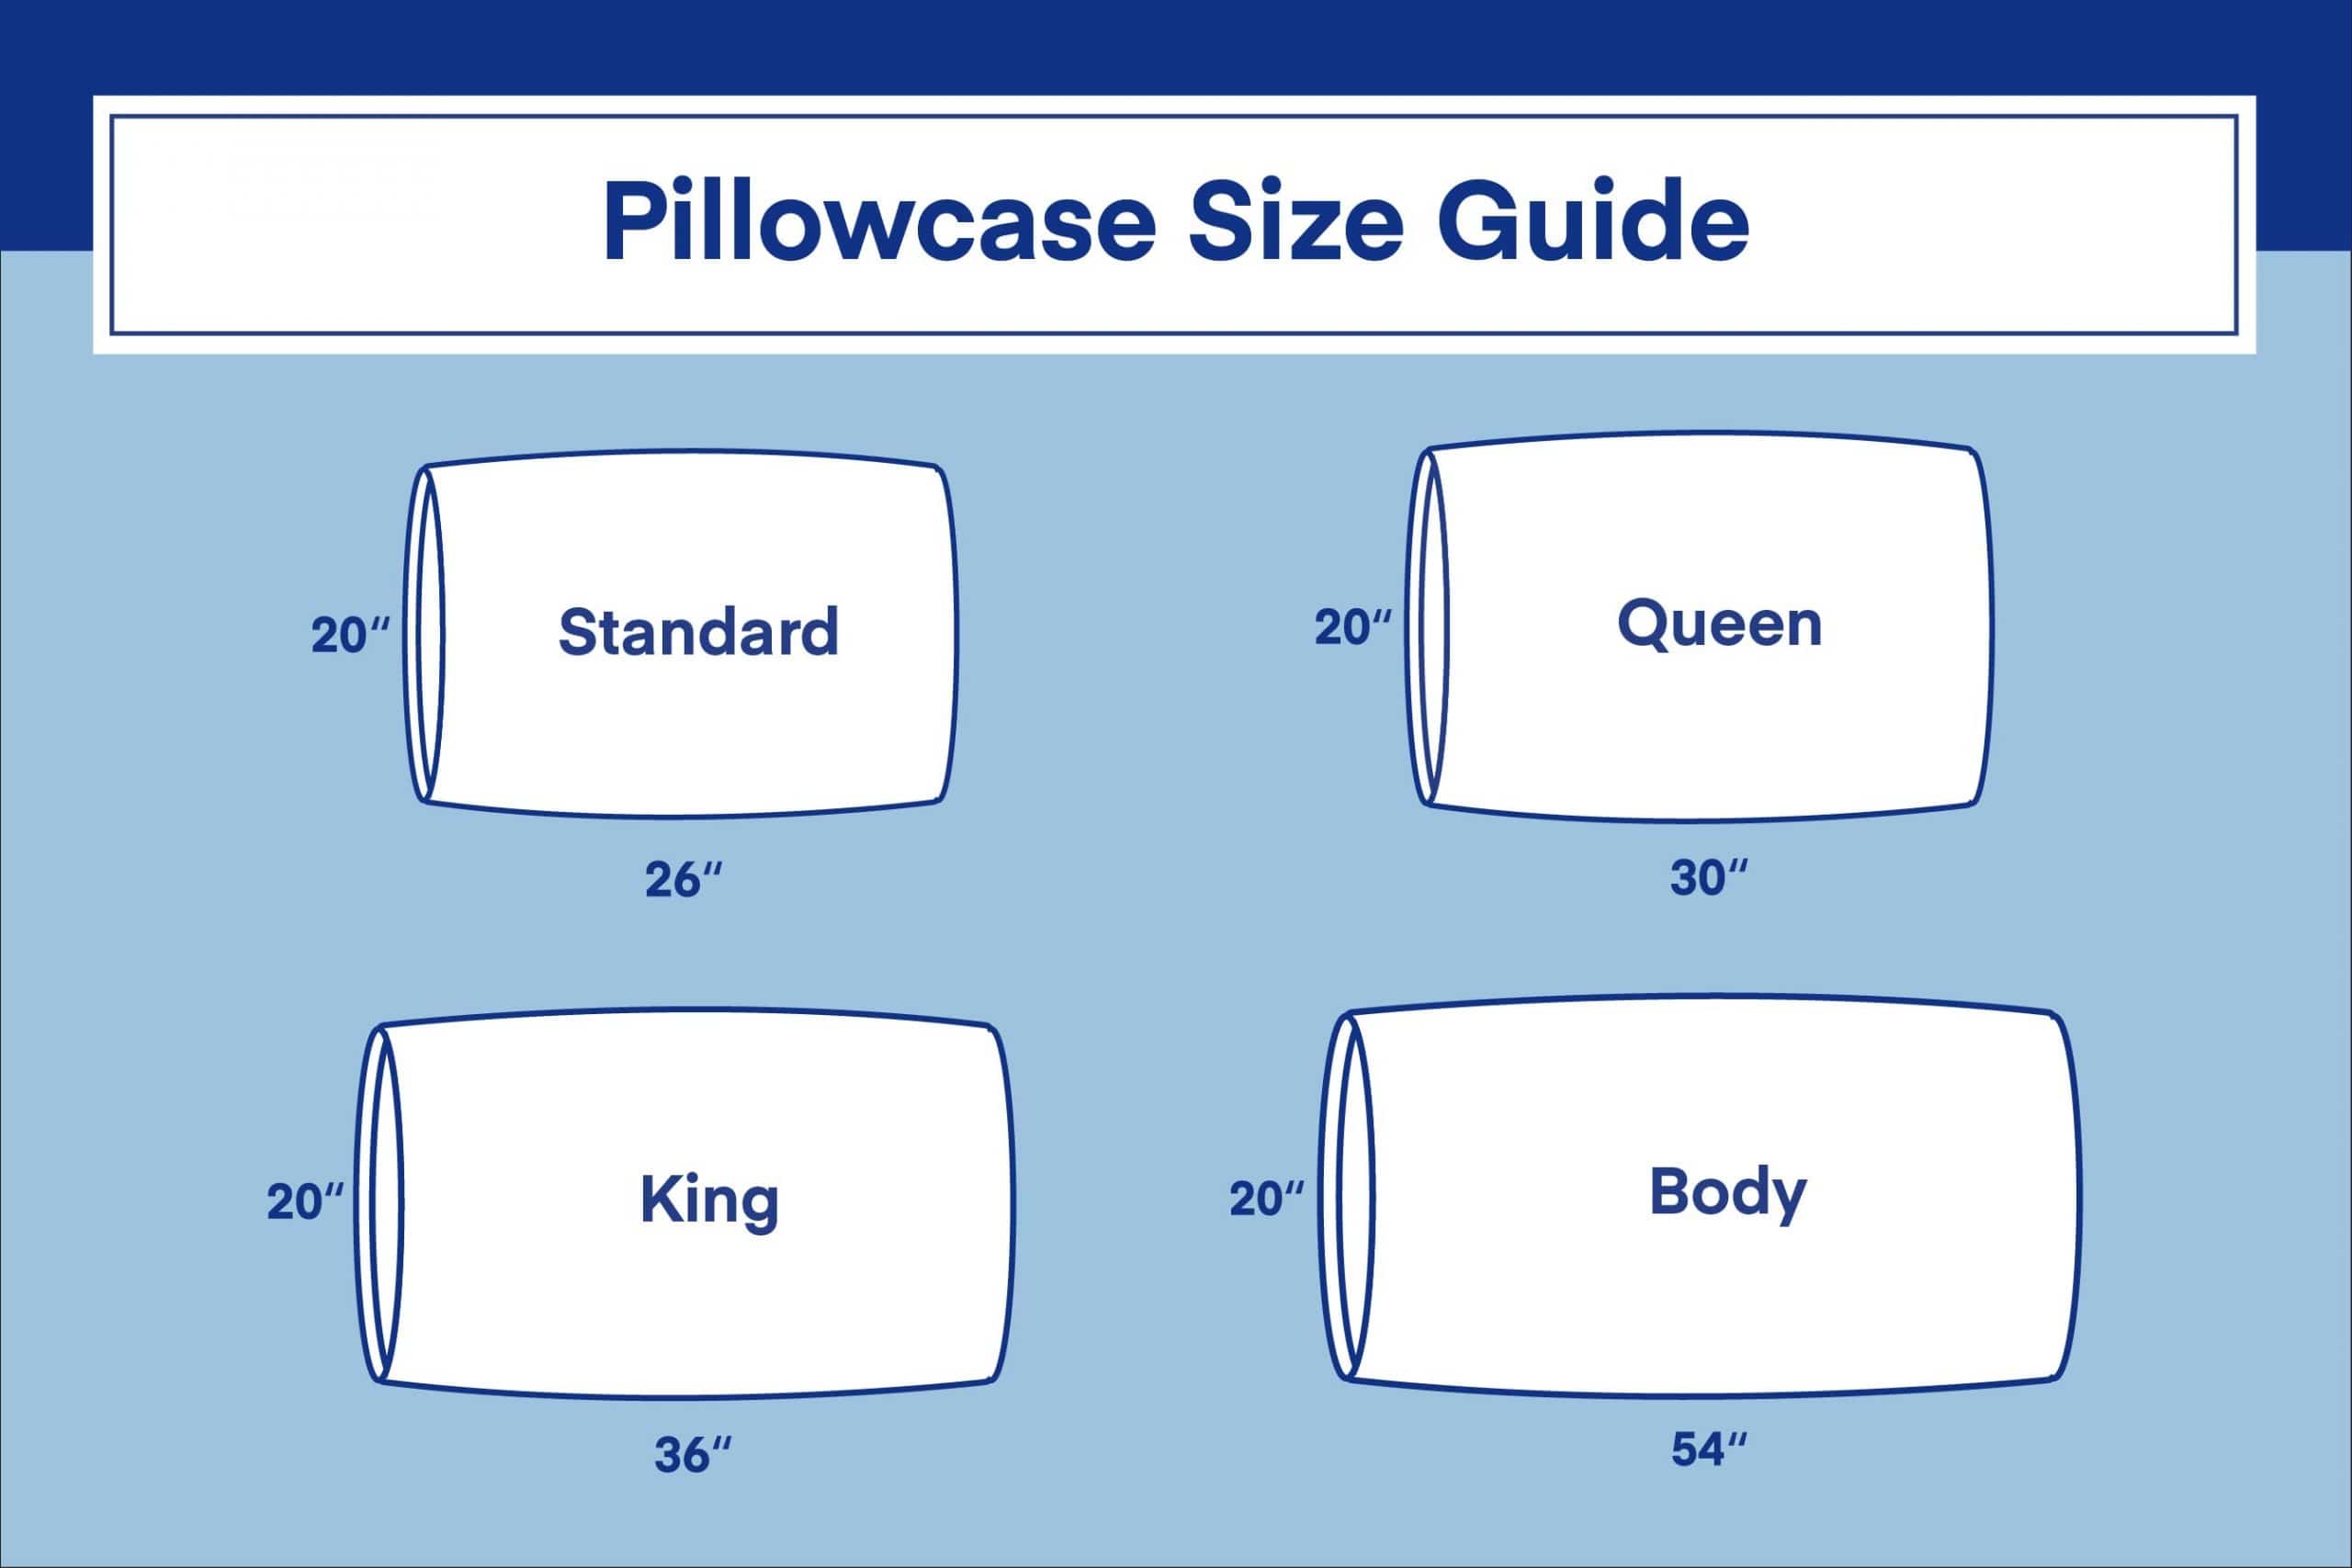 Pillowcase Sizes and Dimensions